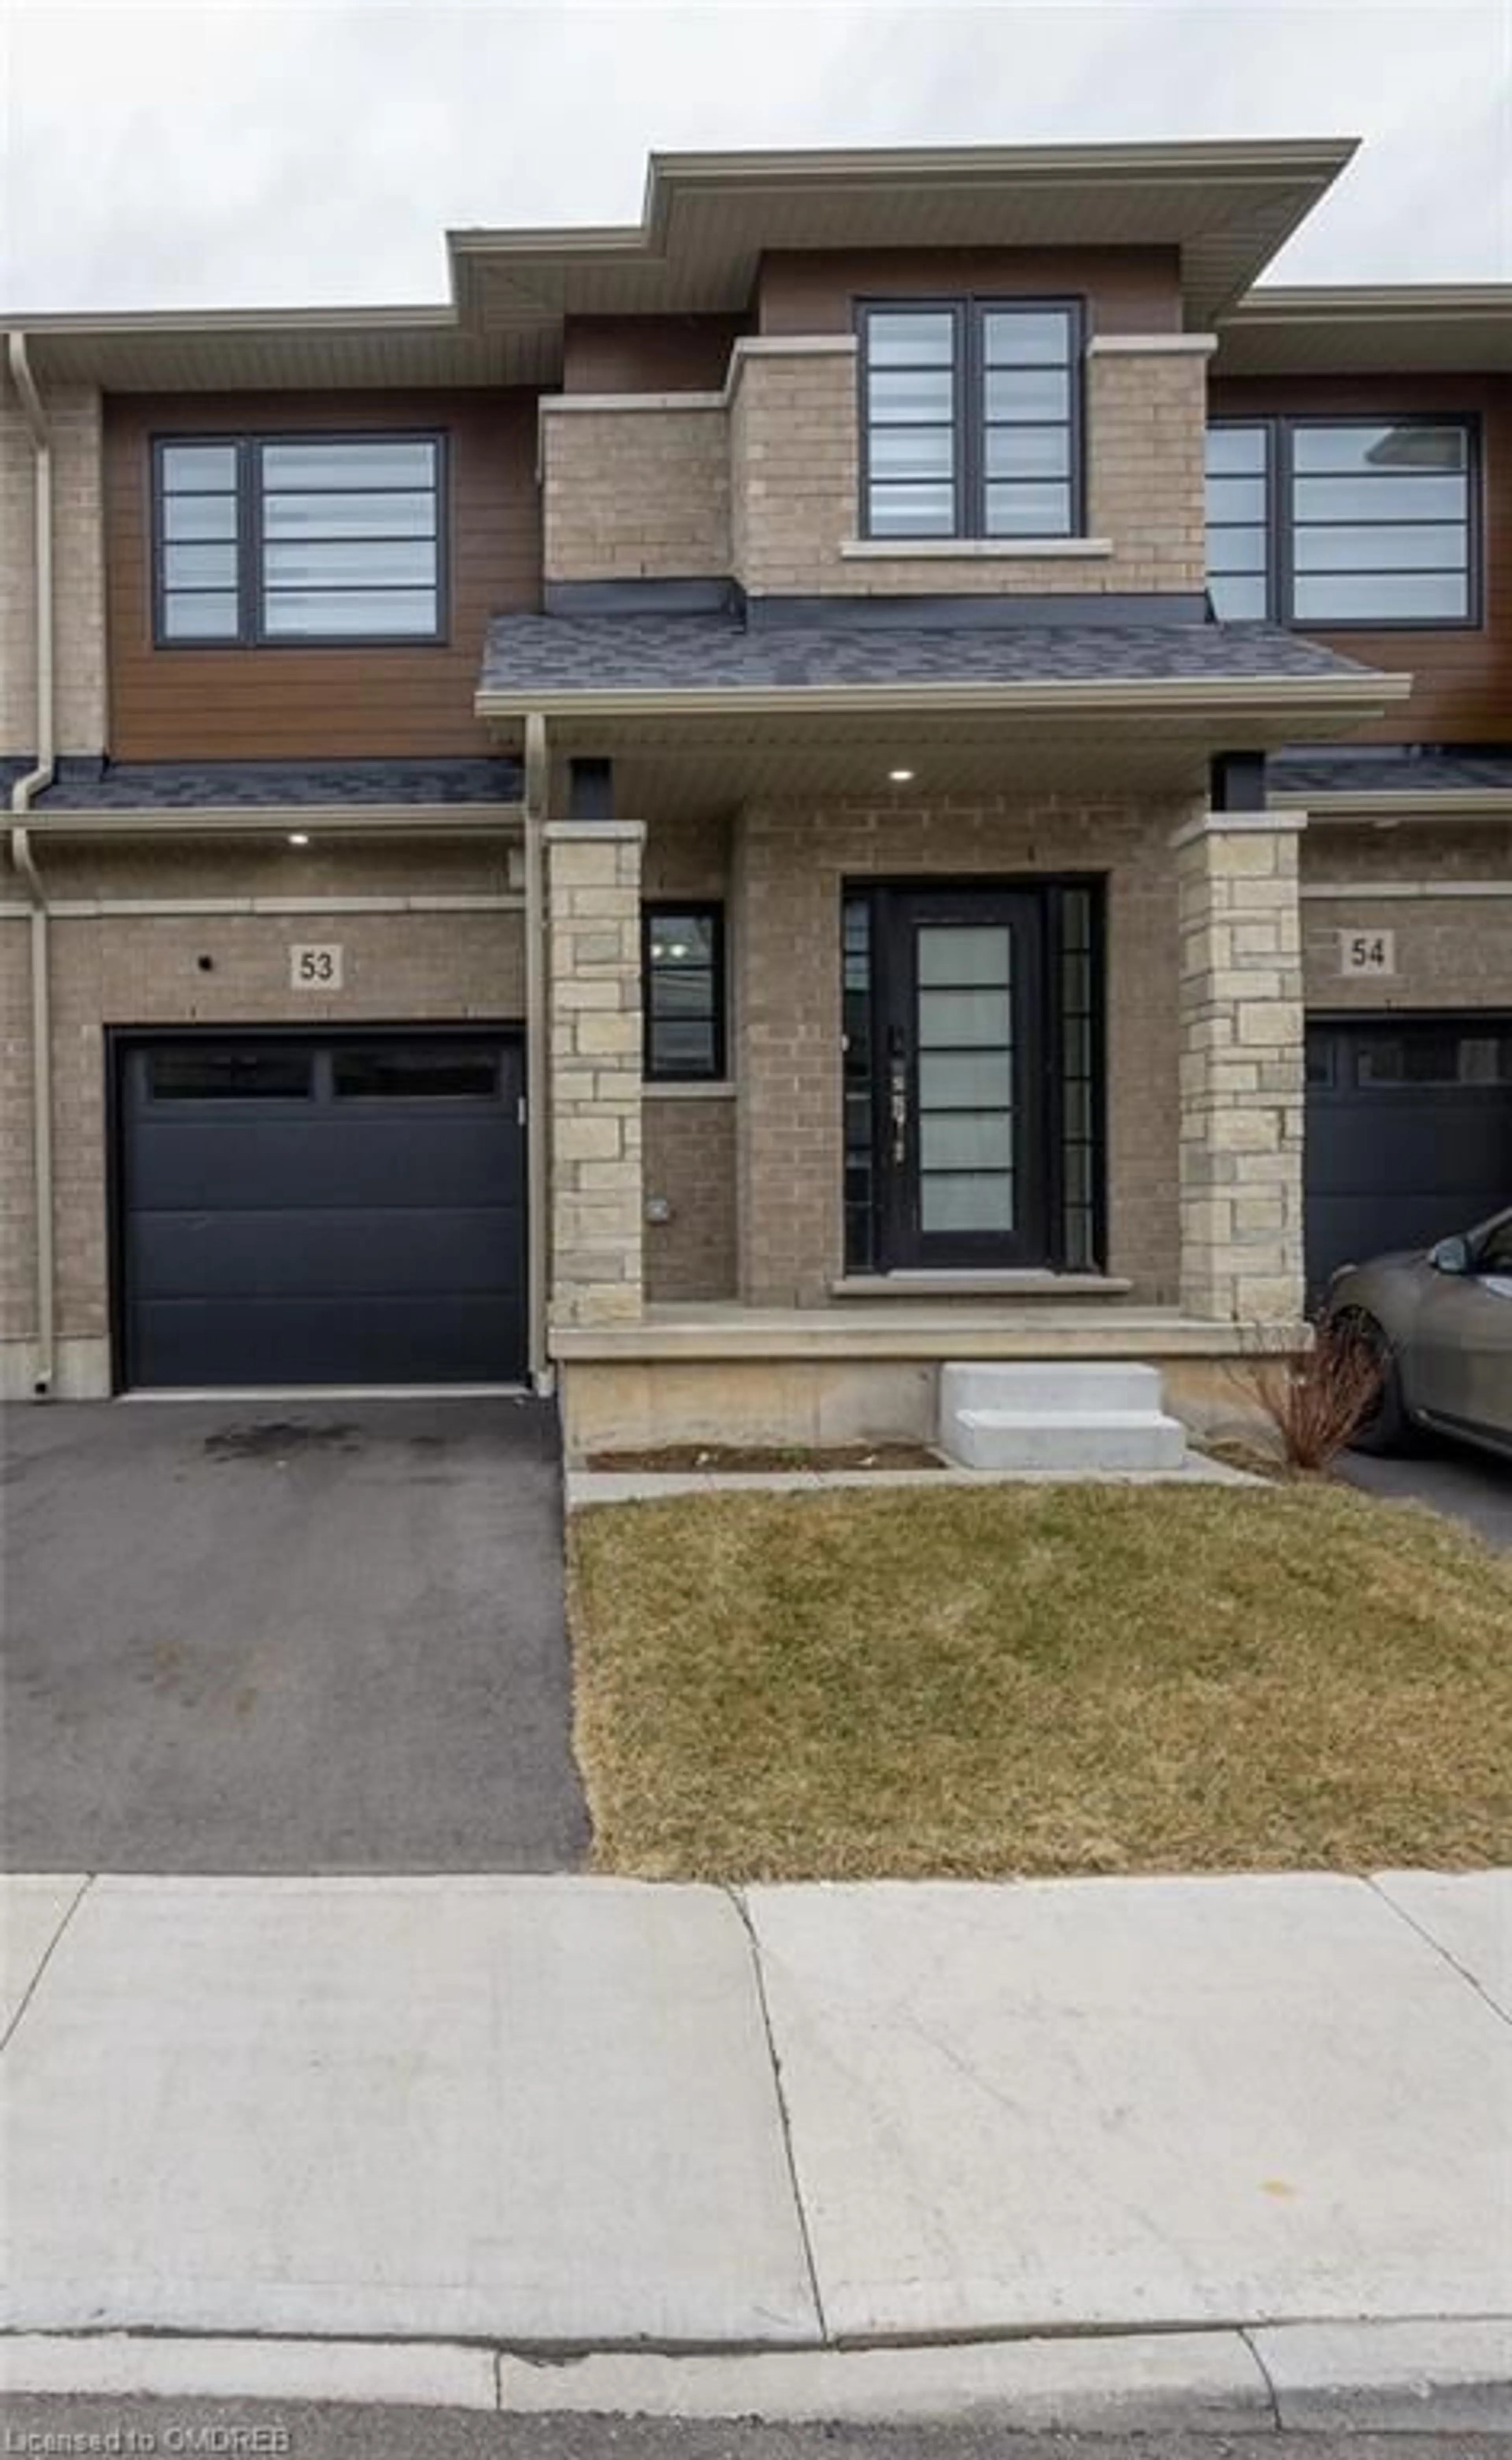 Home with brick exterior material for 520 Grey St #53, Brantford Ontario N3S 0K1